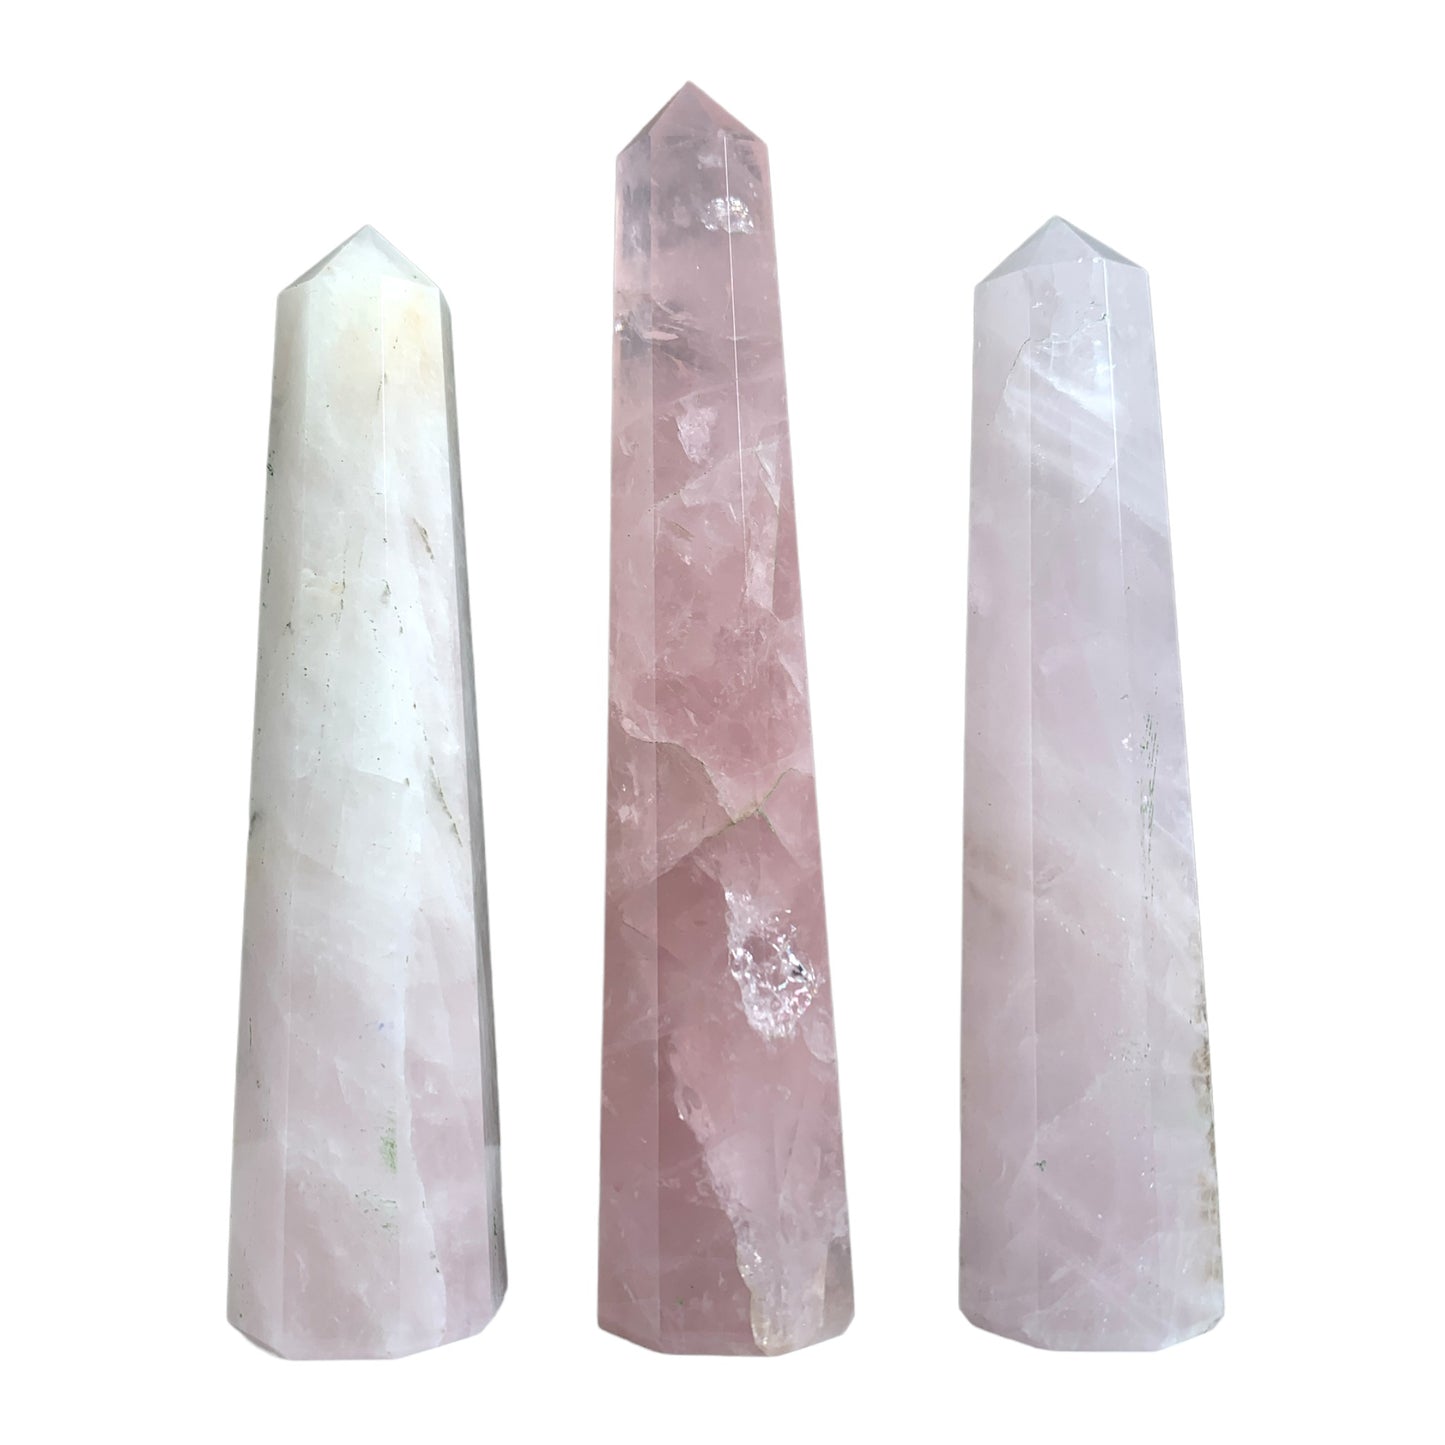 Rose Quartz - Tower Polished Points - 3 to 5 inches - Price per gram per piece (B2B ordering 1 = 1 Tower so we charge Ex. 65g = $7.15 each)